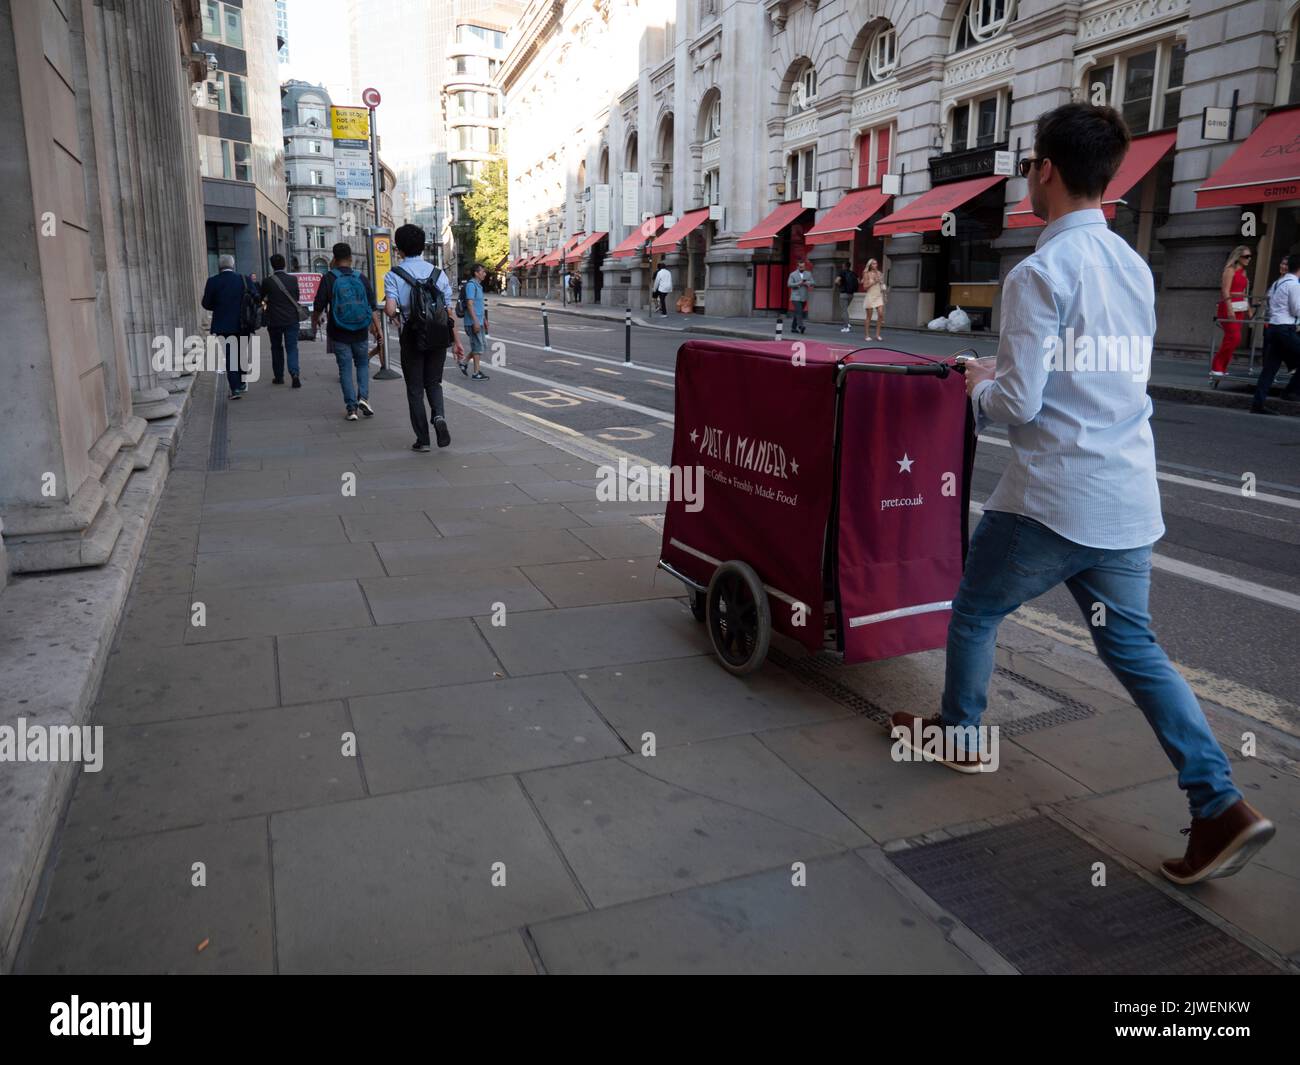 City of London UK. Pret a Manger delivery push cart operator walking past The Bank of England, Threadneedle Street, London Stock Photo